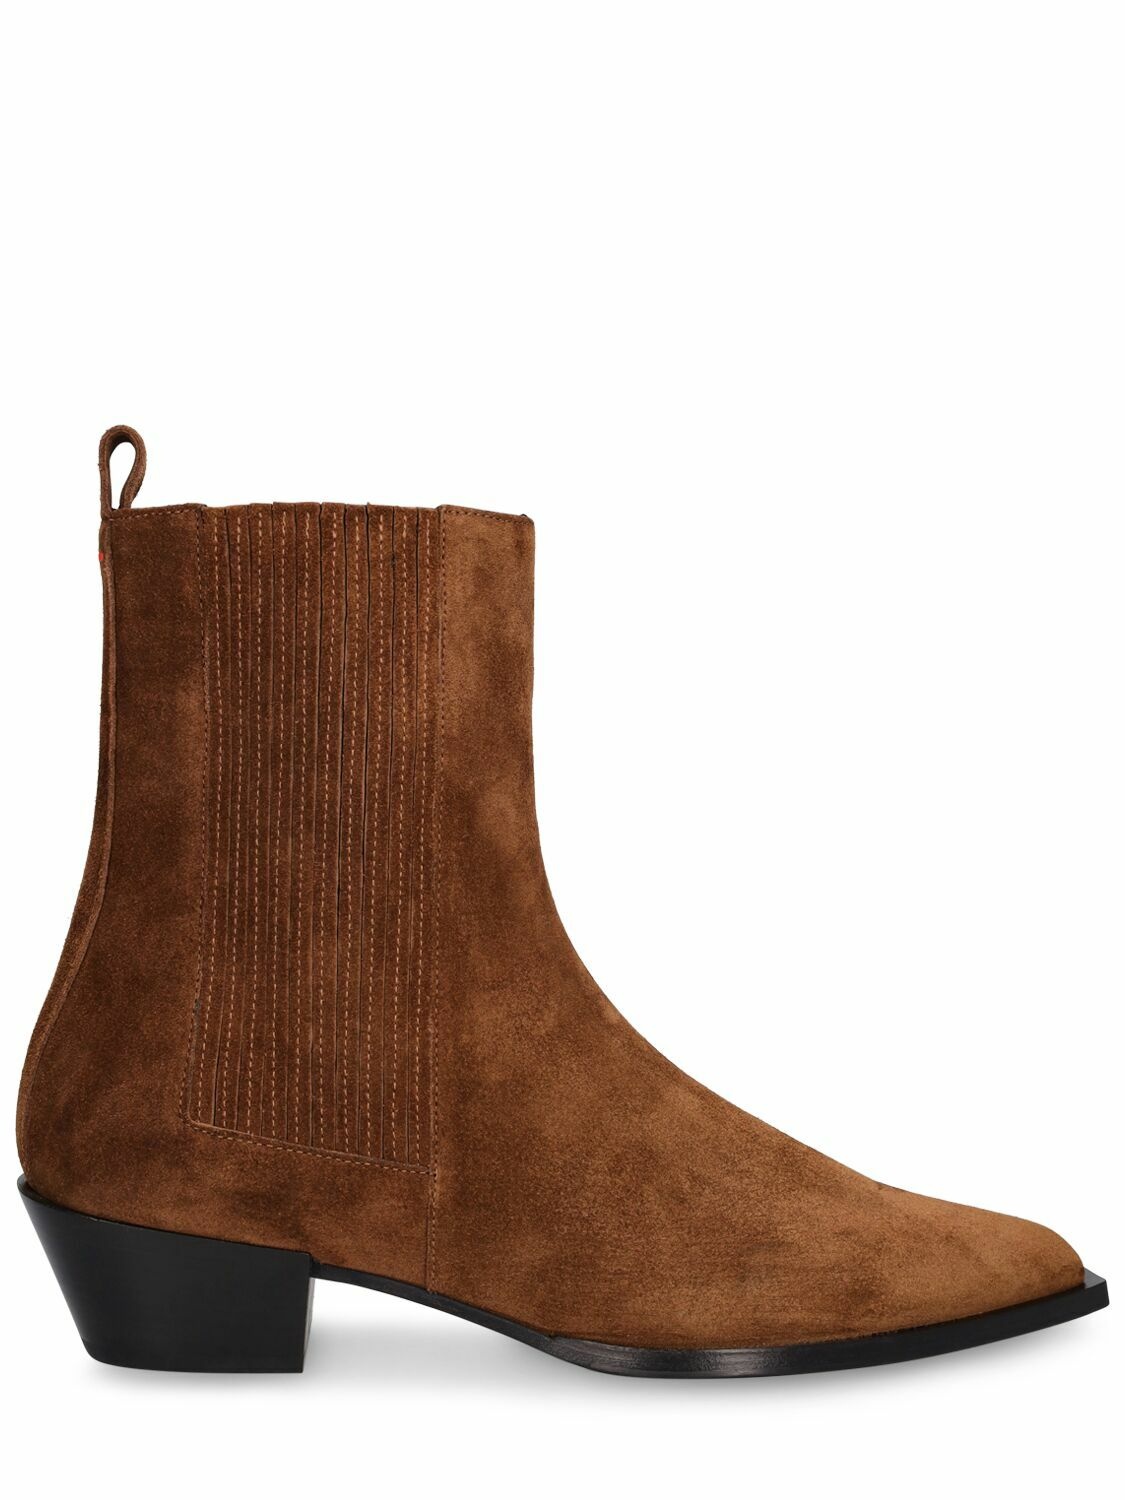 Photo: AEYDE 40mm Belinda Suede Ankle Boots